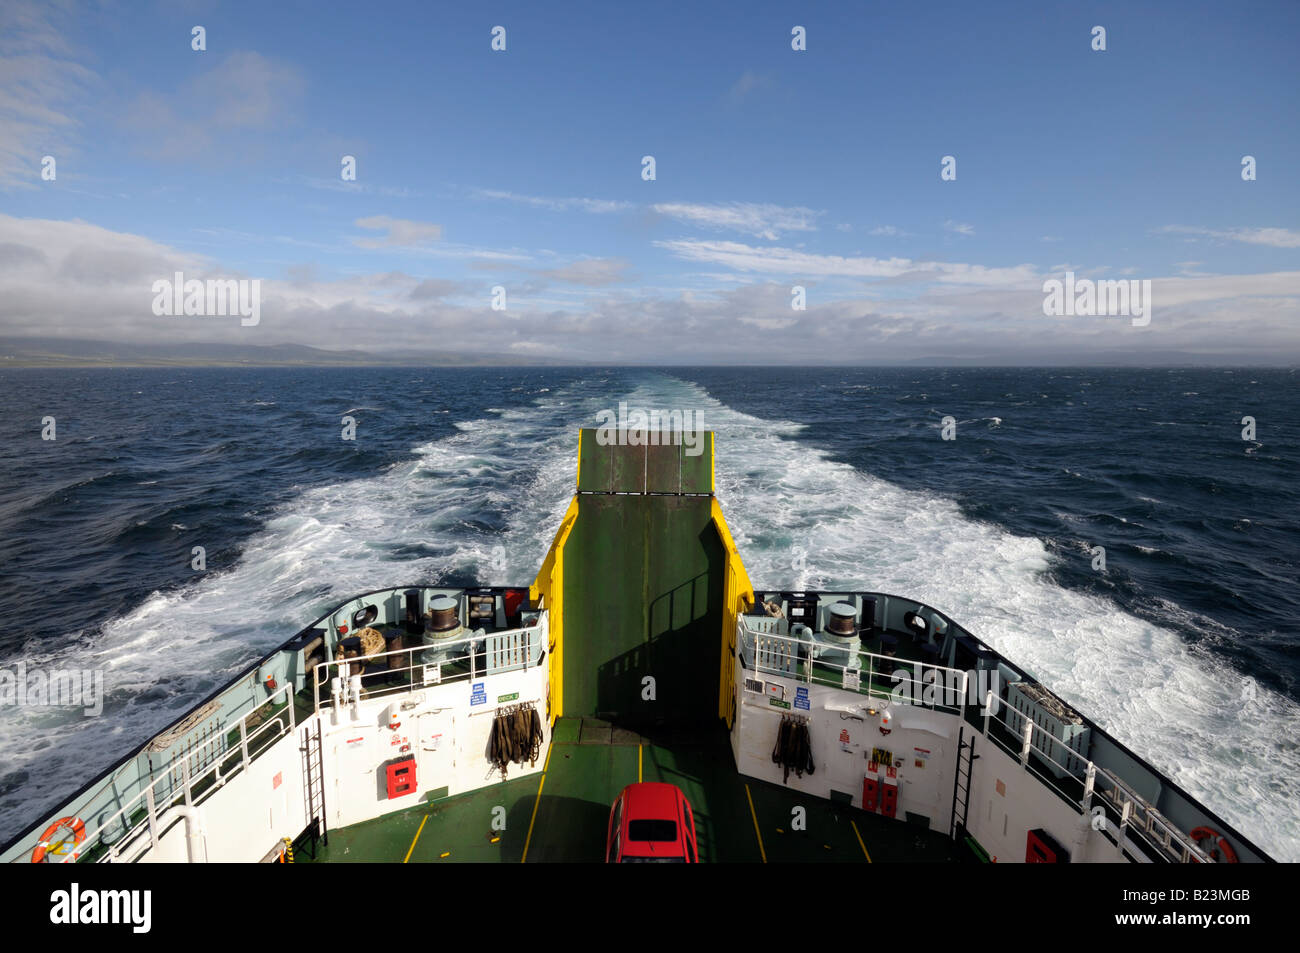 View from the rear or stern of a car ferry at sea Stock Photo